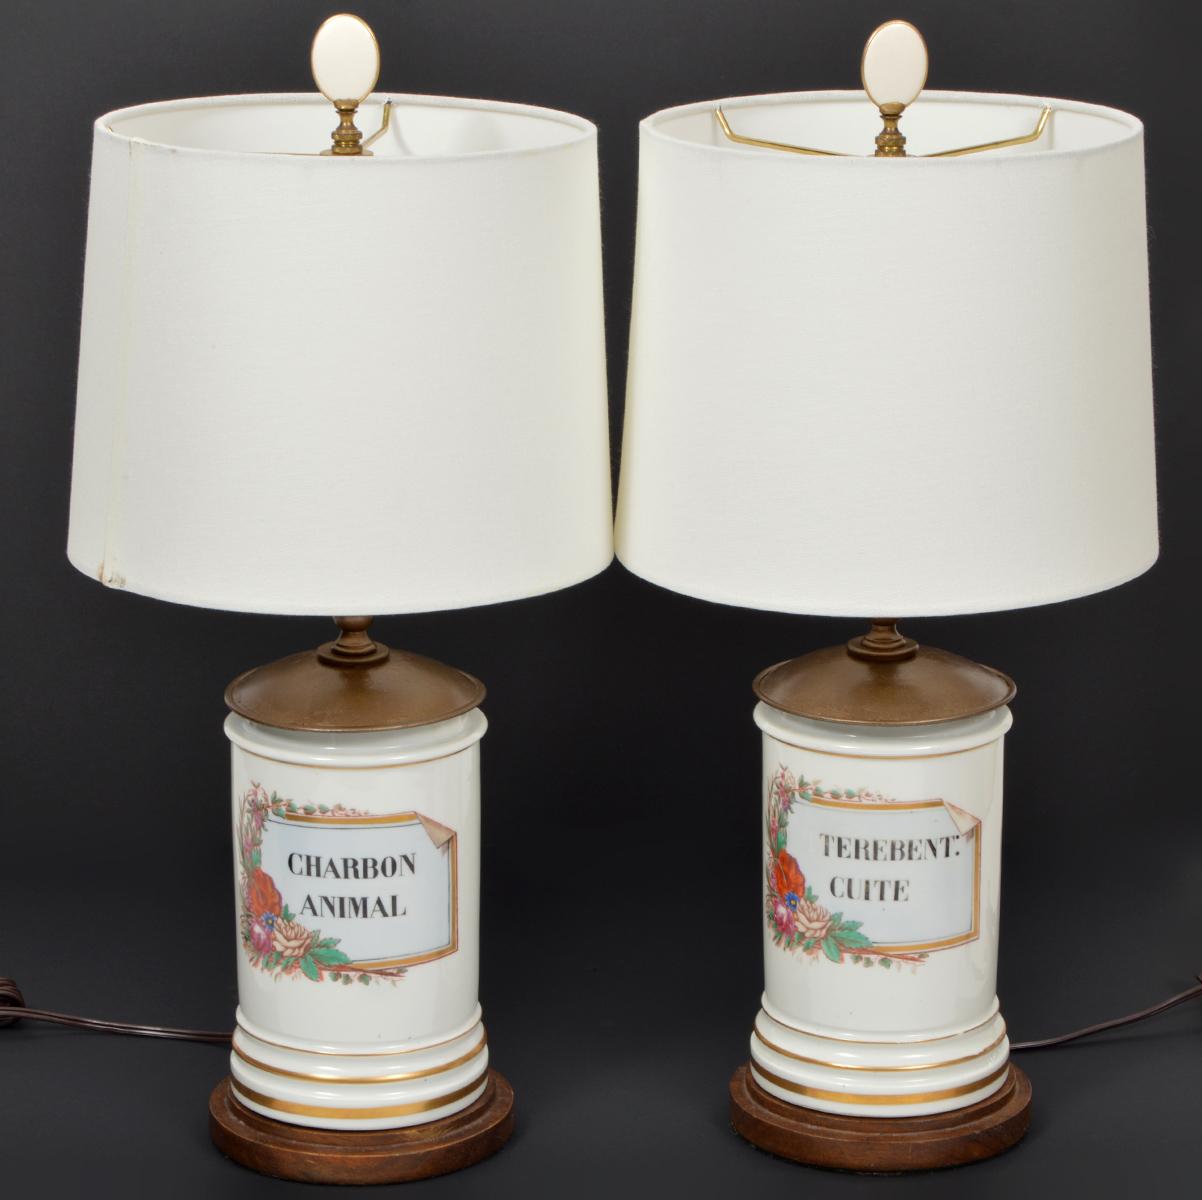 A fine pair of French 'Old Paris' porcelain apothecary Jars with beautiful painted floral cartouches and letters dating to the late 19th century. They are mounted on wood bases and covered with metal lids as part of their transformation into lamps.